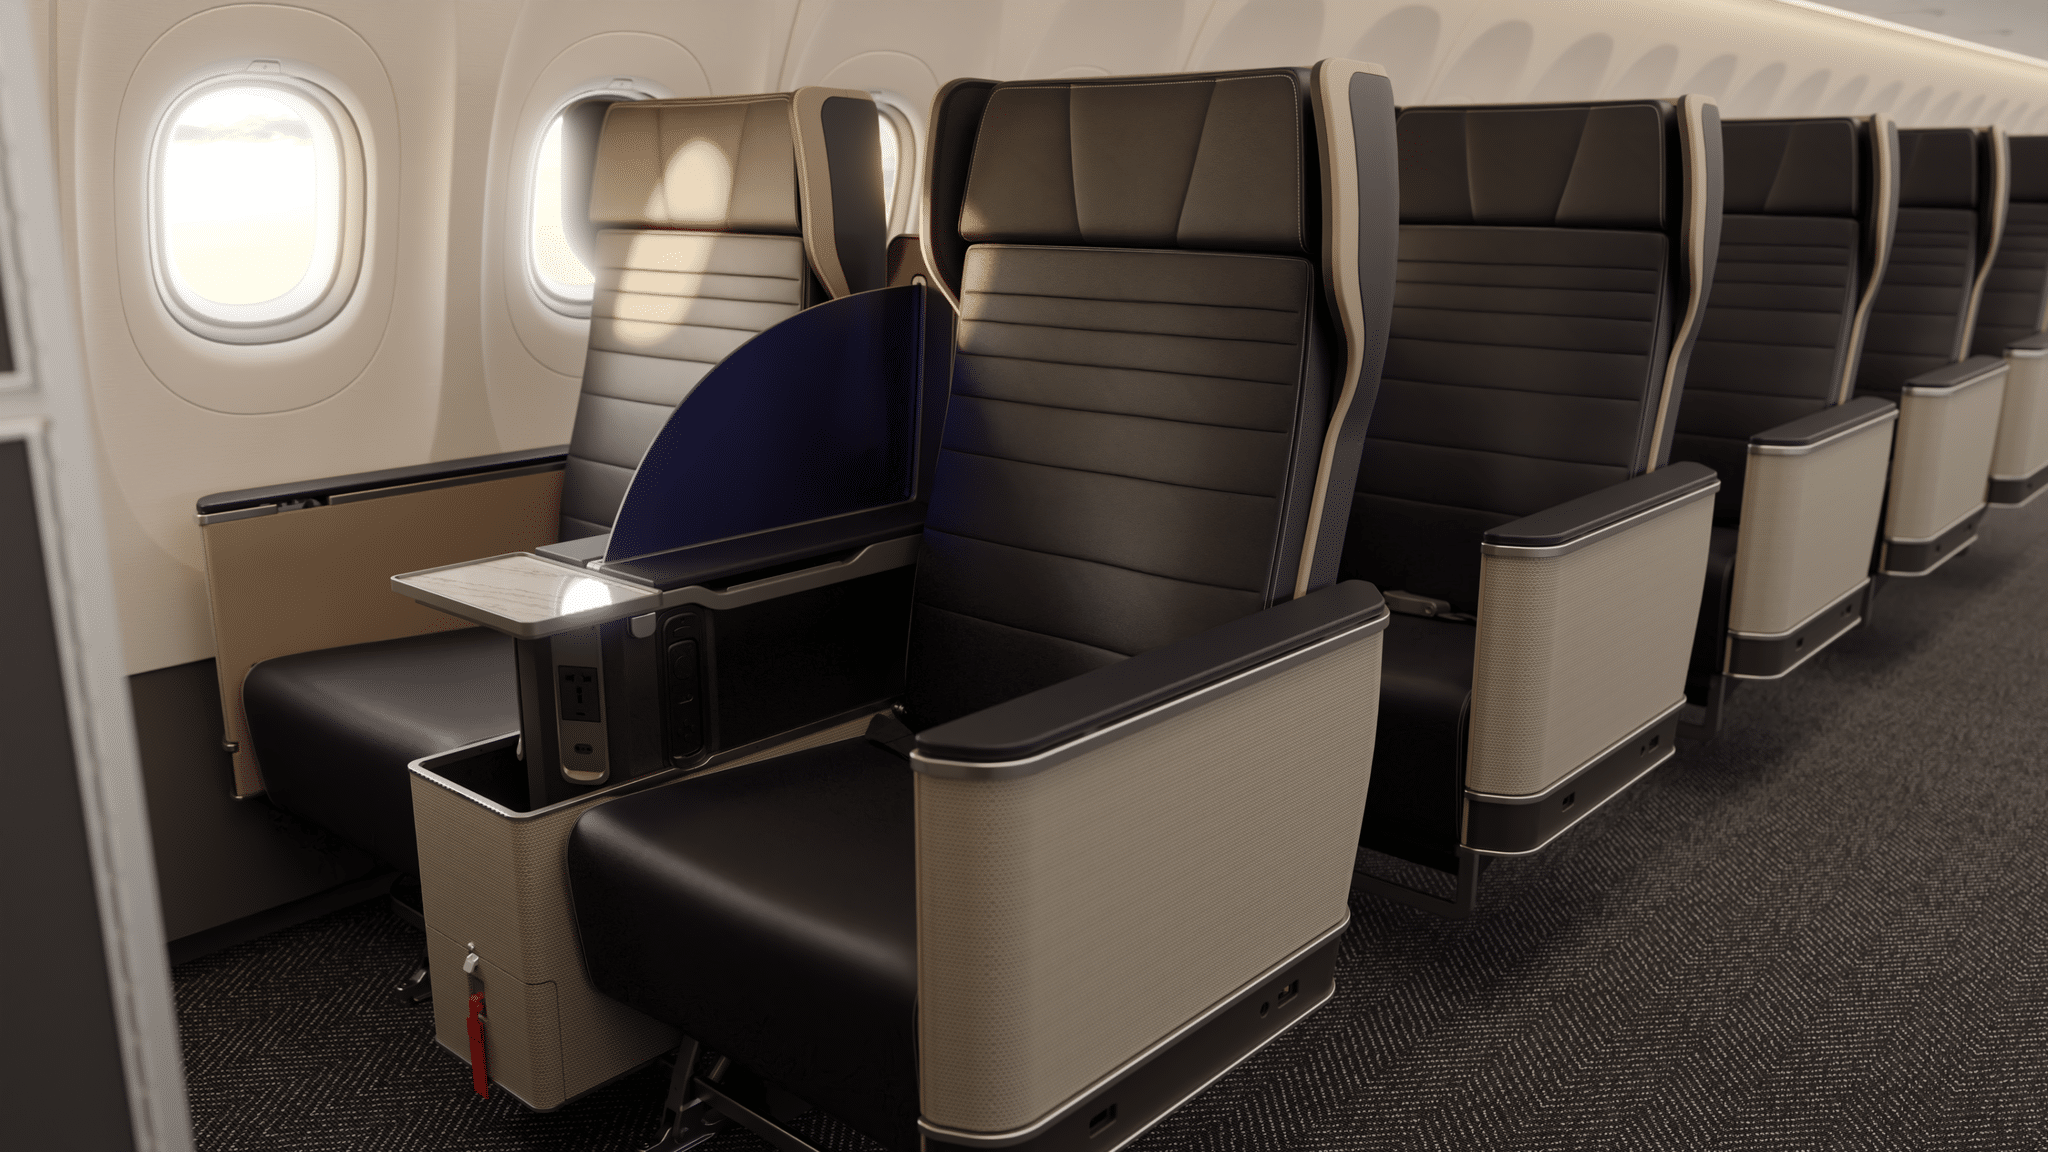 United Airlines debuts Wireless Charging Onboard and New Domestic First Seat